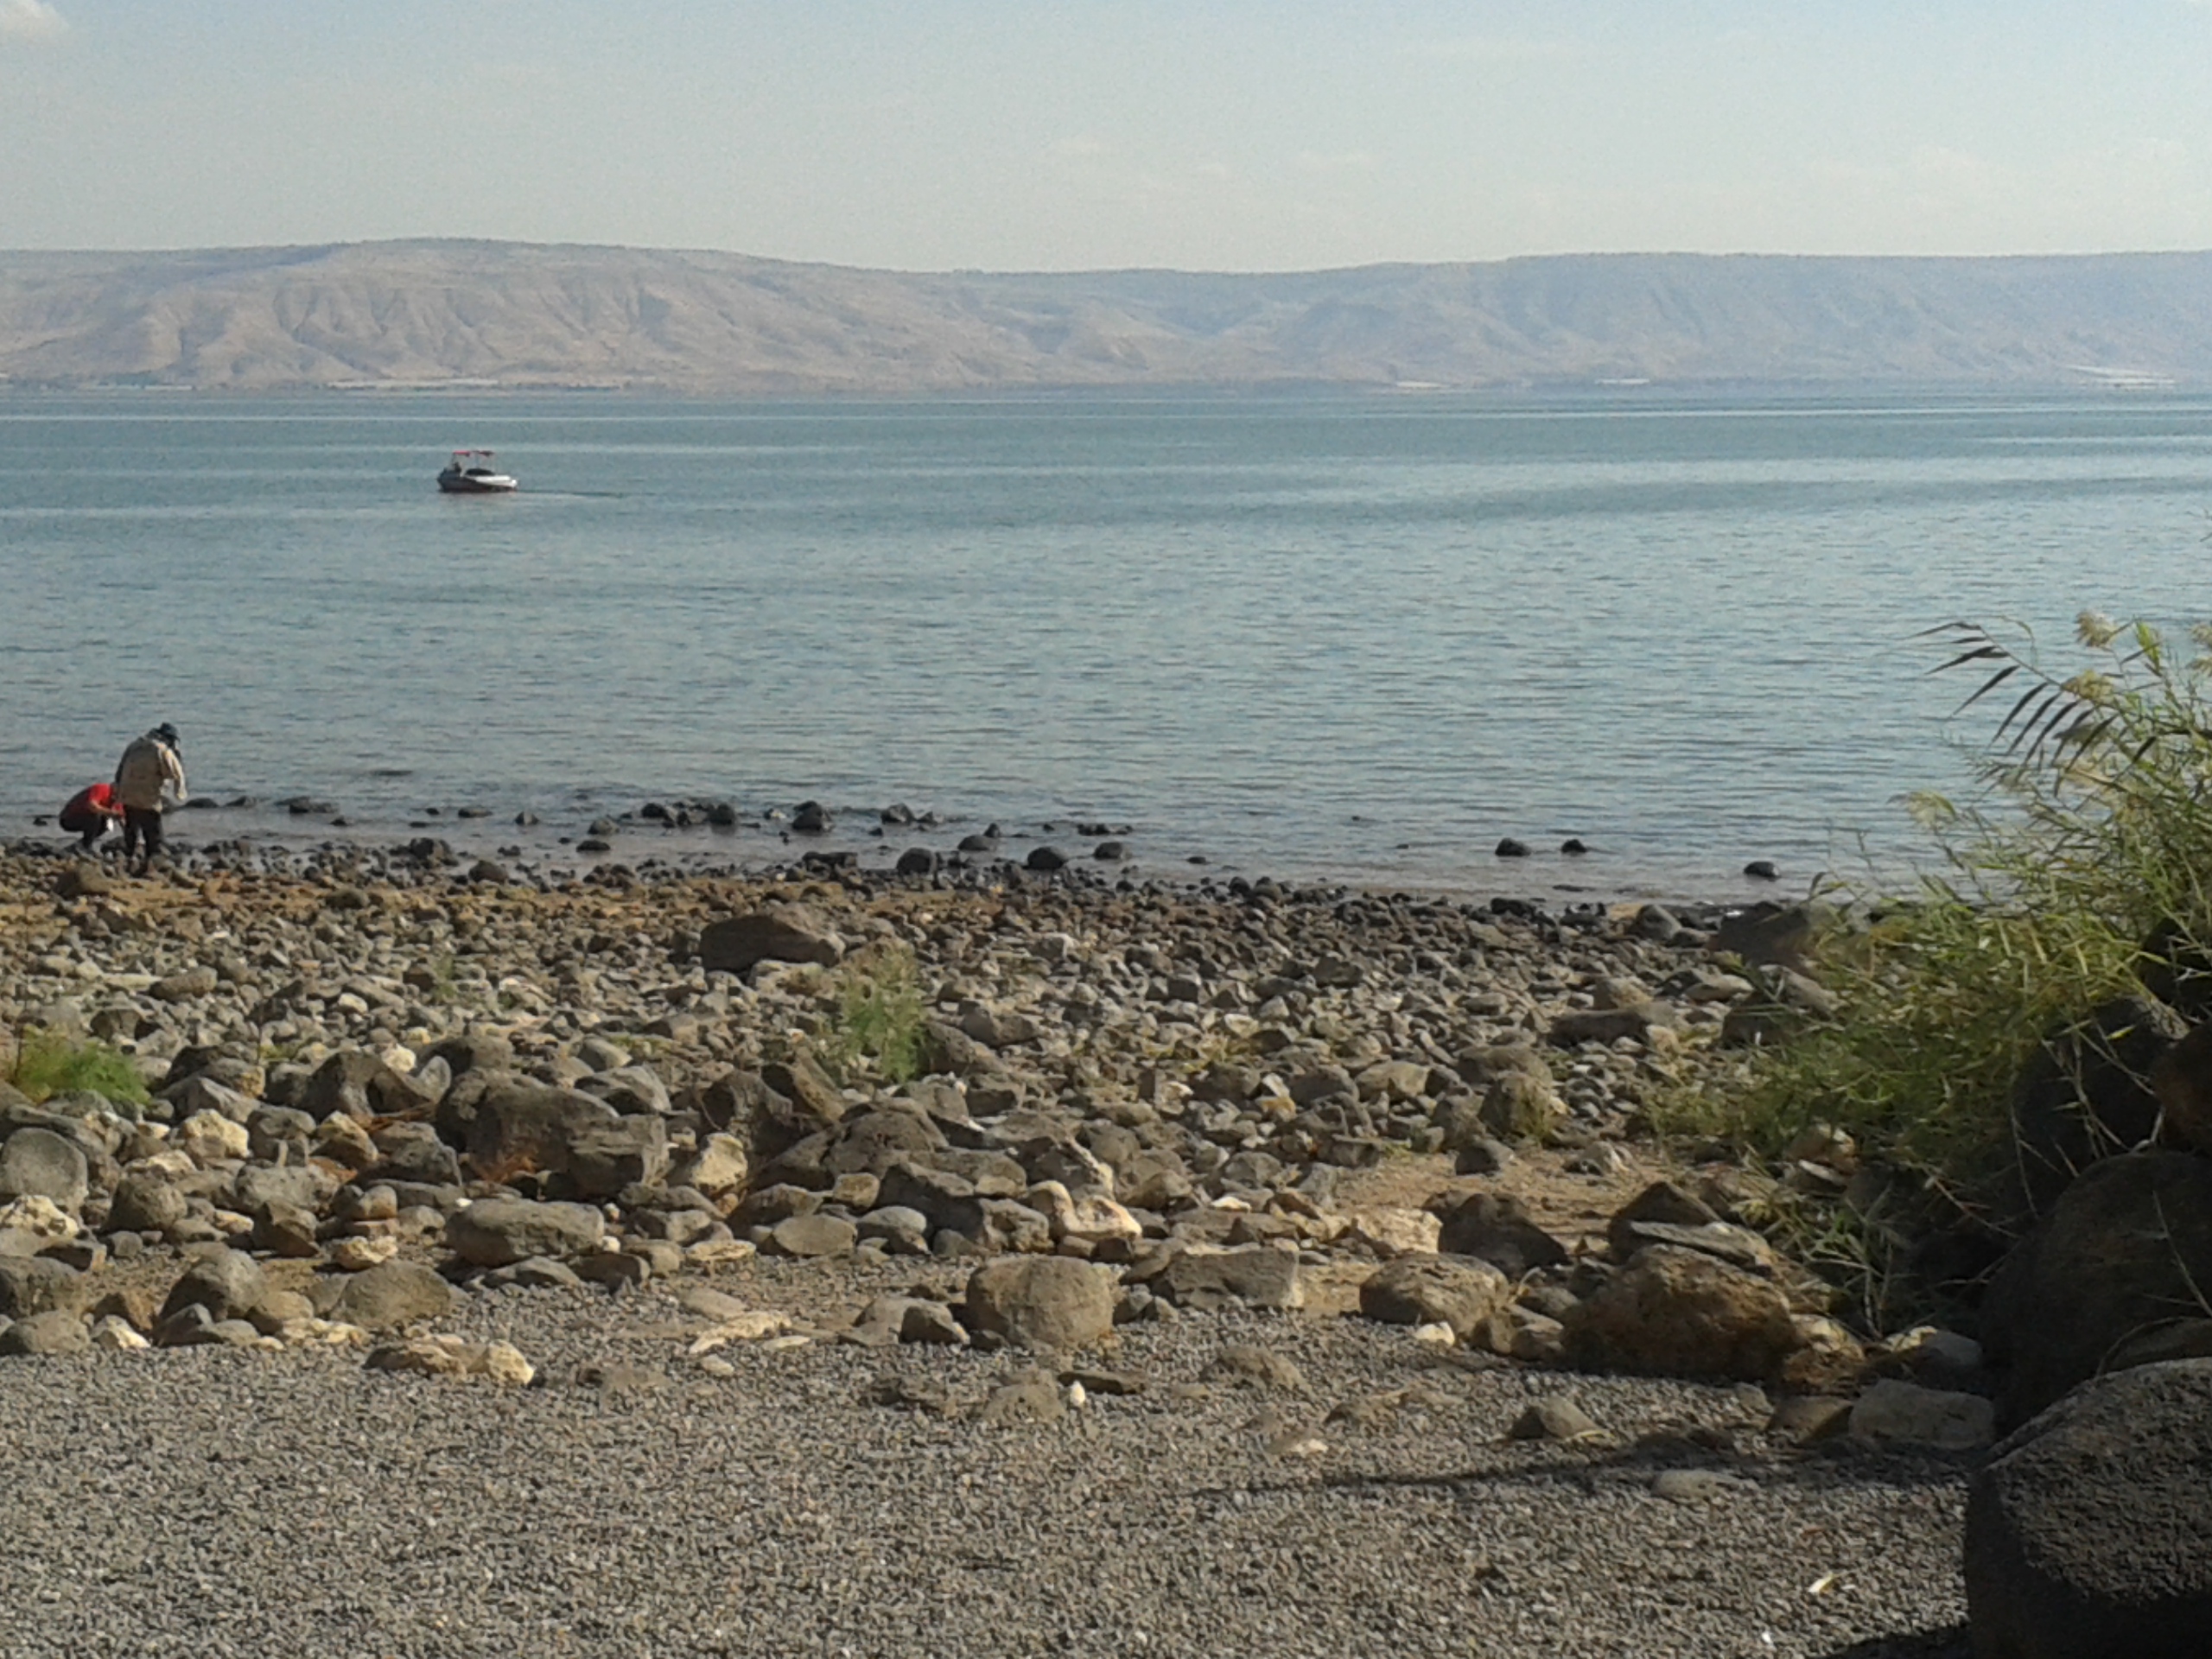 The Sea of Galilee, where Jews are once more hearing the call of Jesus.